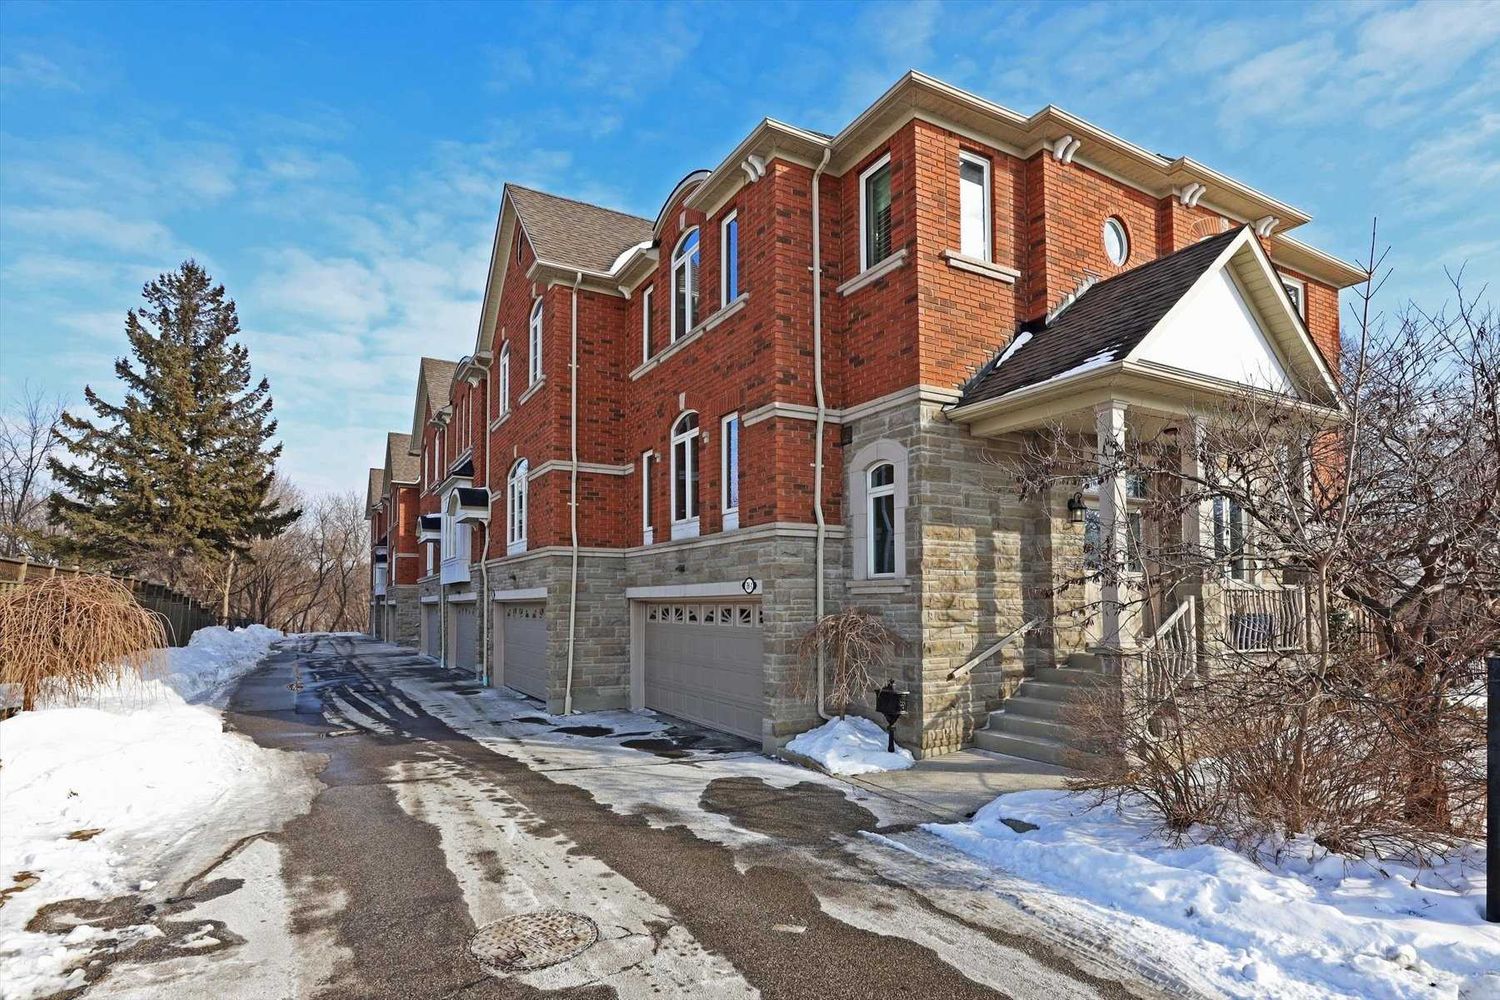 581 Scarlett Road. Silverbrook Homes is located in  Etobicoke, Toronto - image #1 of 2